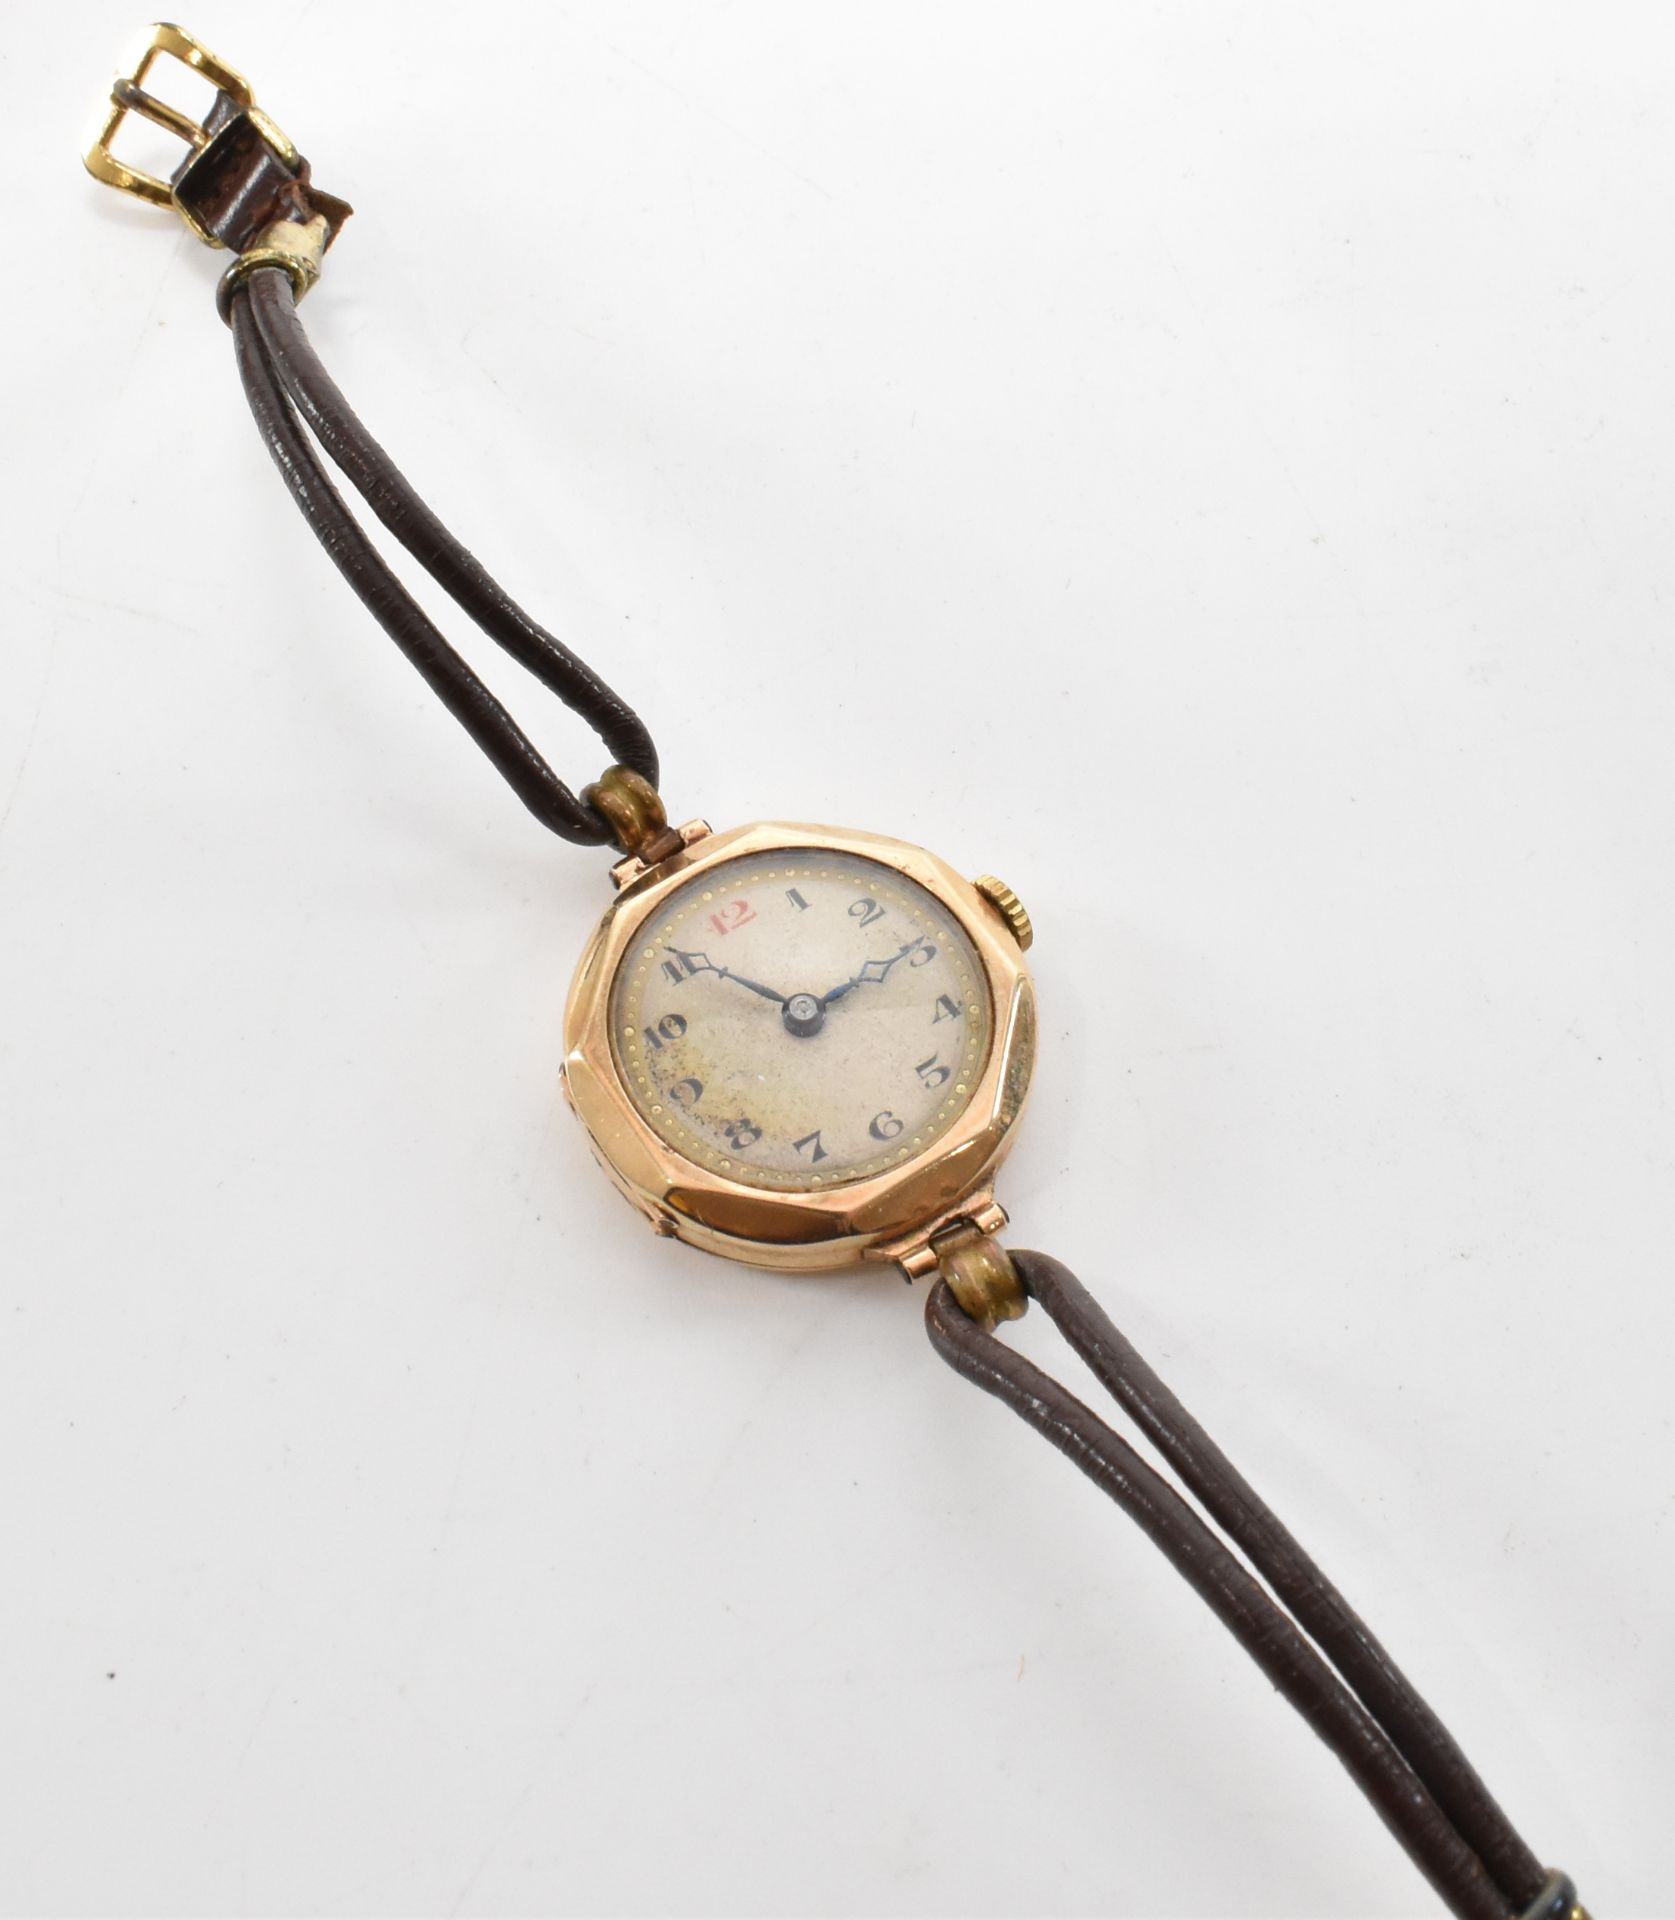 1920S / 1930S 9CT GOLD WRIST WATCH - Image 4 of 7